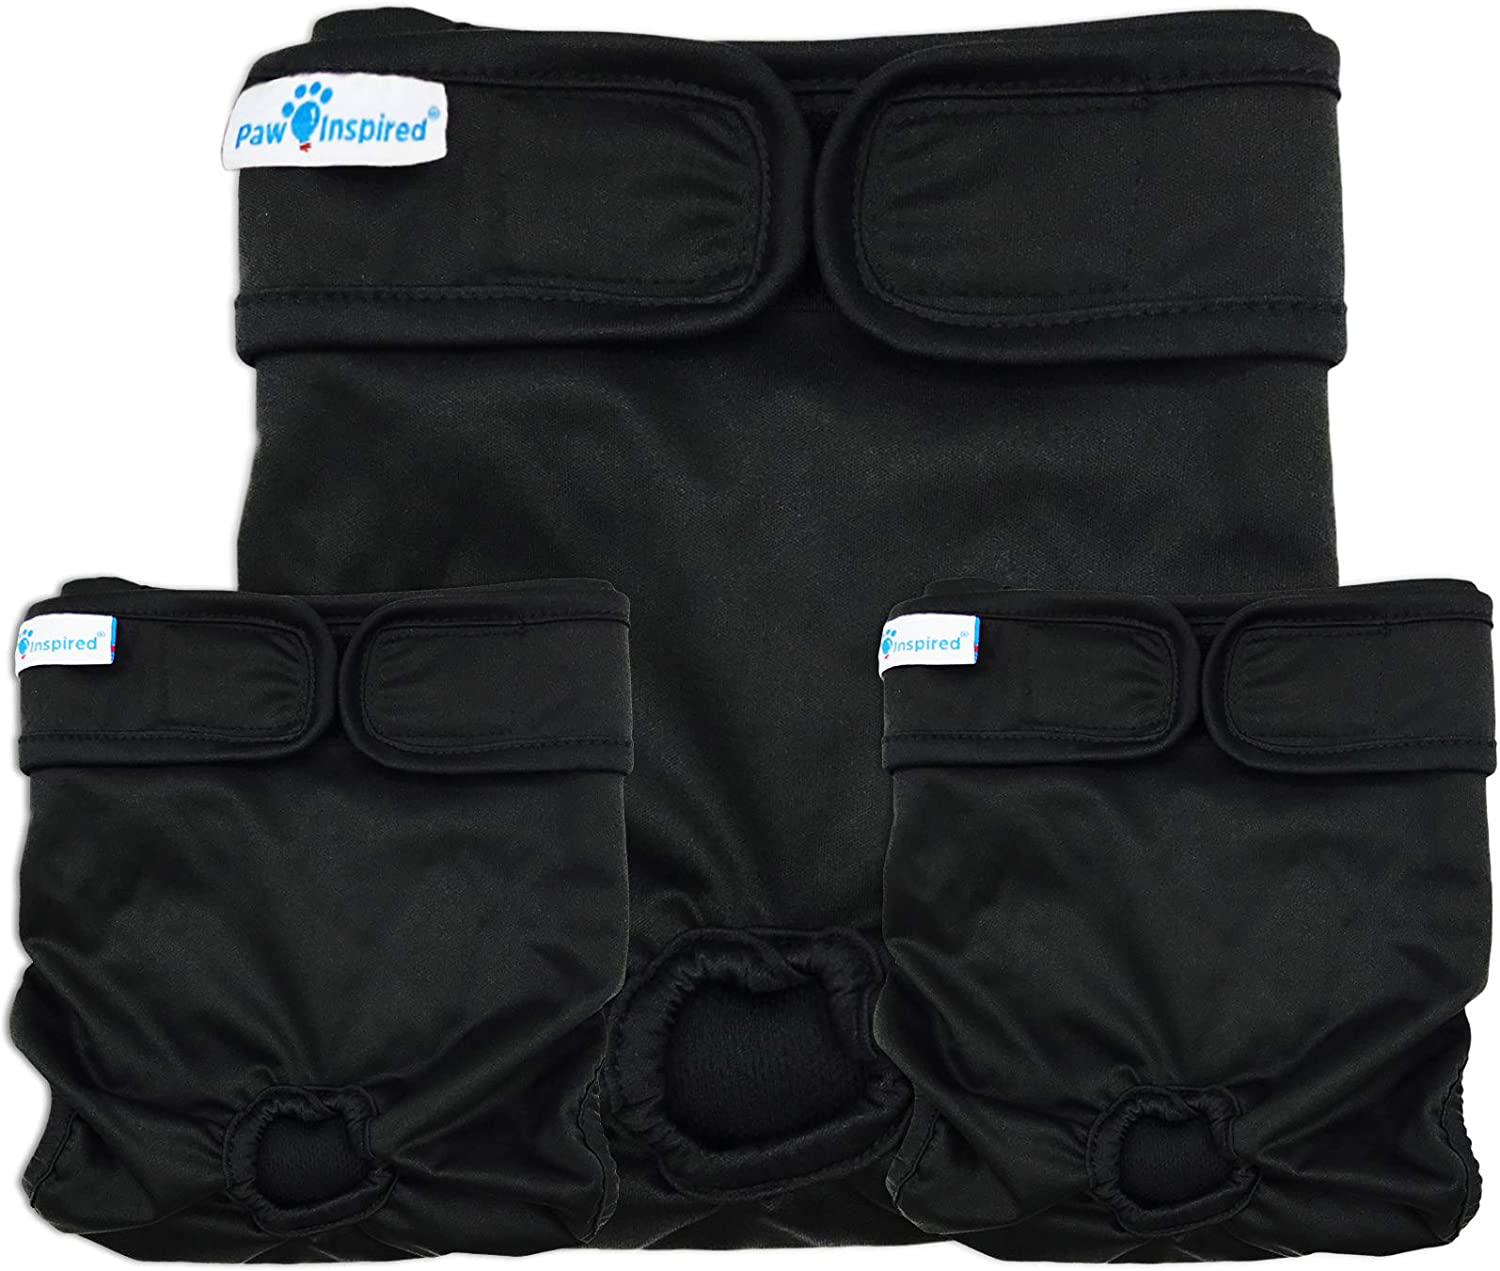 Paw Inspired Washable Dog Diapers | Reusable Dog Diapers | Washable Female Dog Diapers | Cloth Dog Diapers for Dogs in Heat, or Dog Incontinence Diapers Animals & Pet Supplies > Pet Supplies > Dog Supplies > Dog Diaper Pads & Liners Paw Inspired Black (Black Lining) Small (3 ct.) 